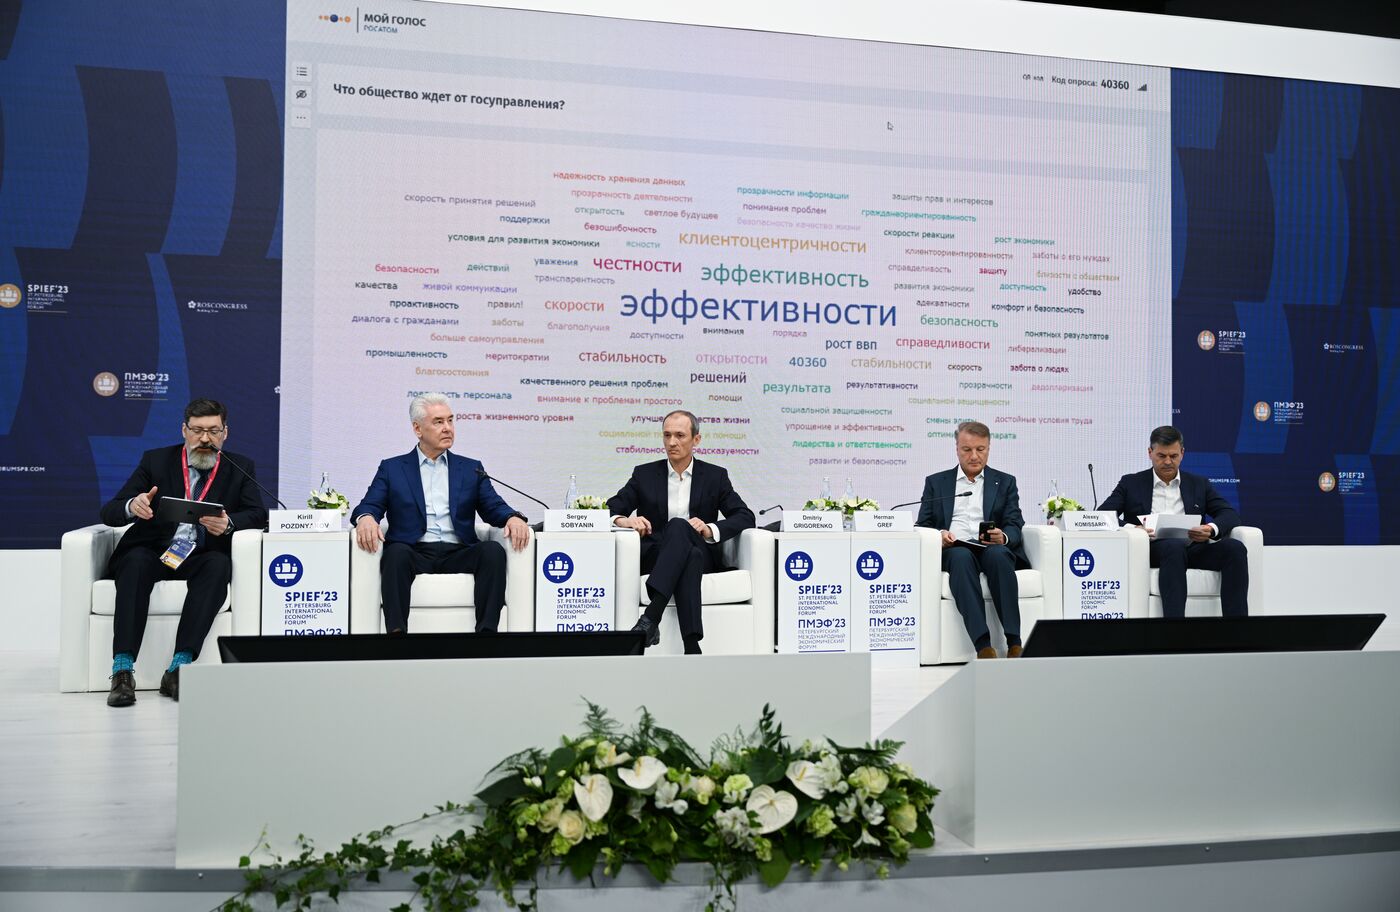 SPIEF-2023. Public Administration: Between People and Data